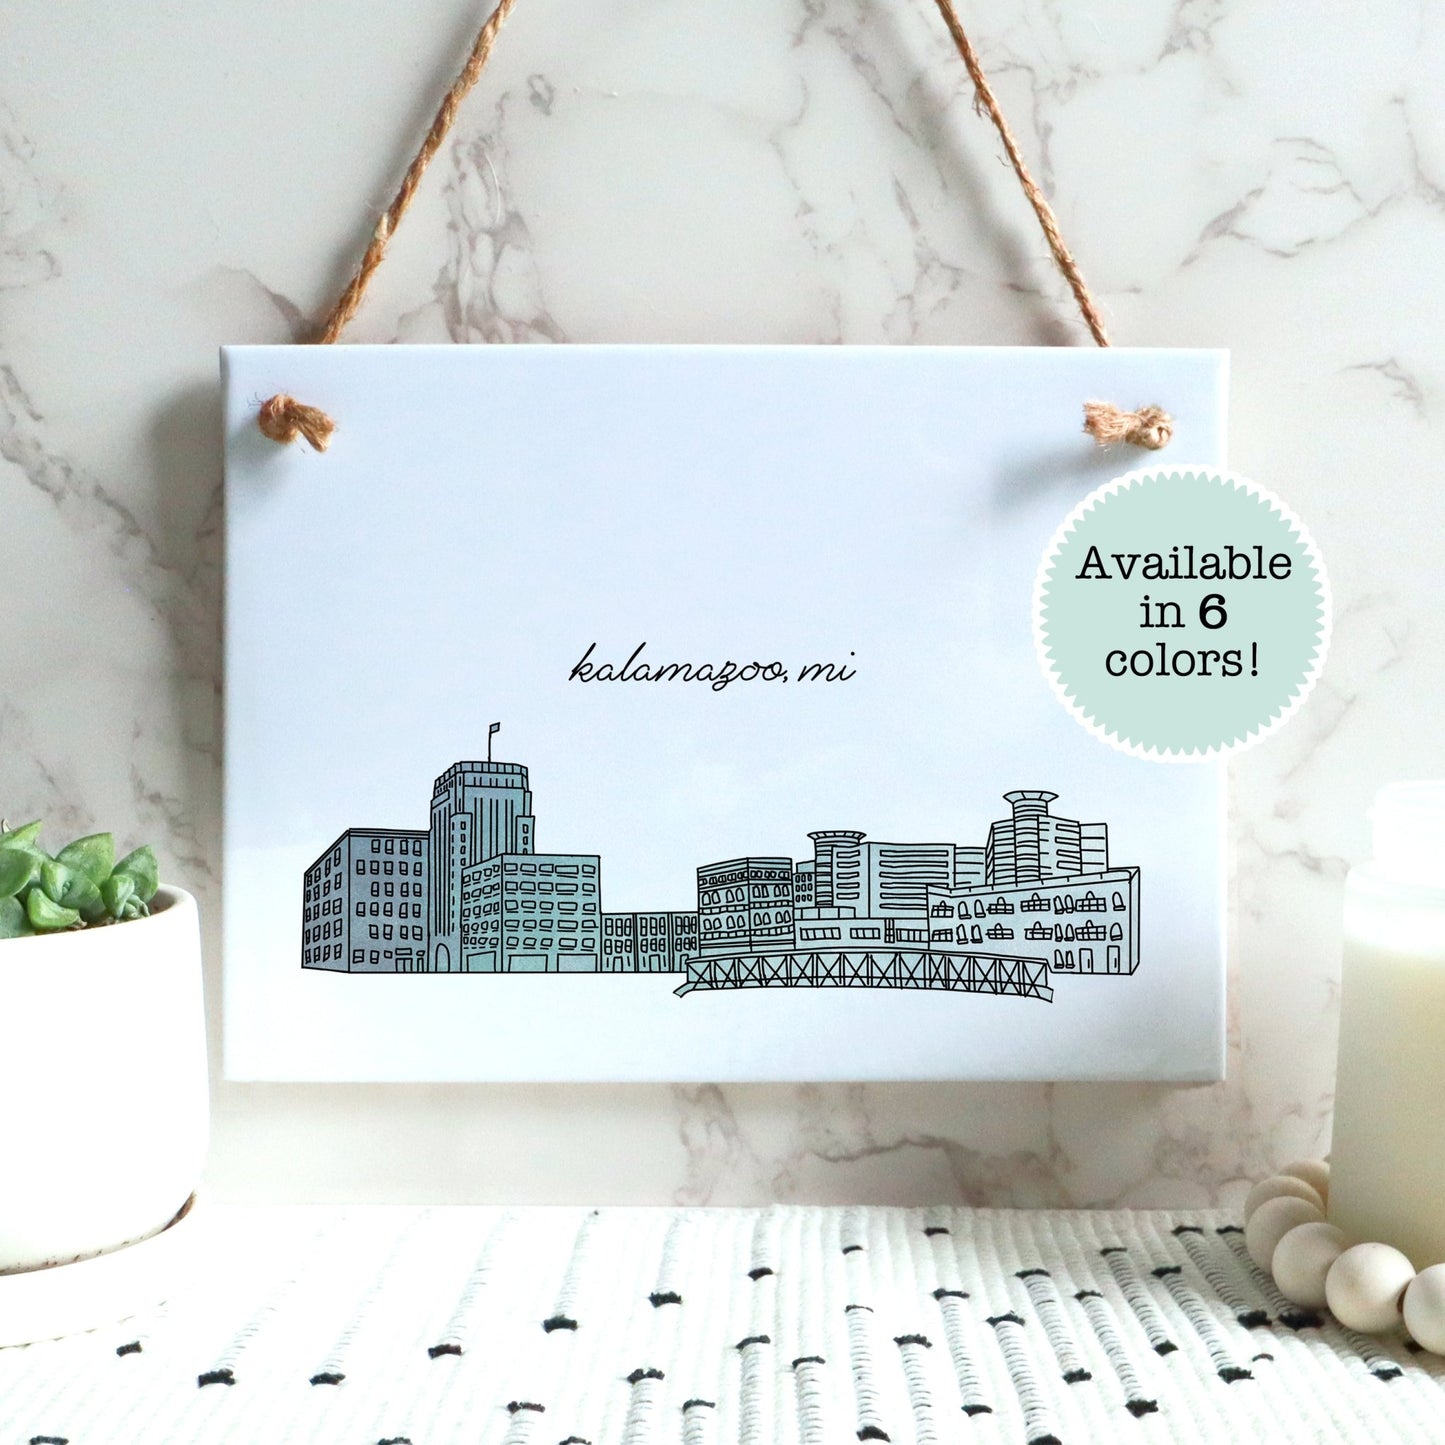 A Kalamazoo MI souvenir of a drawing of the city skyline on a rectangle tile sign, hanging on a wall - in the color blue